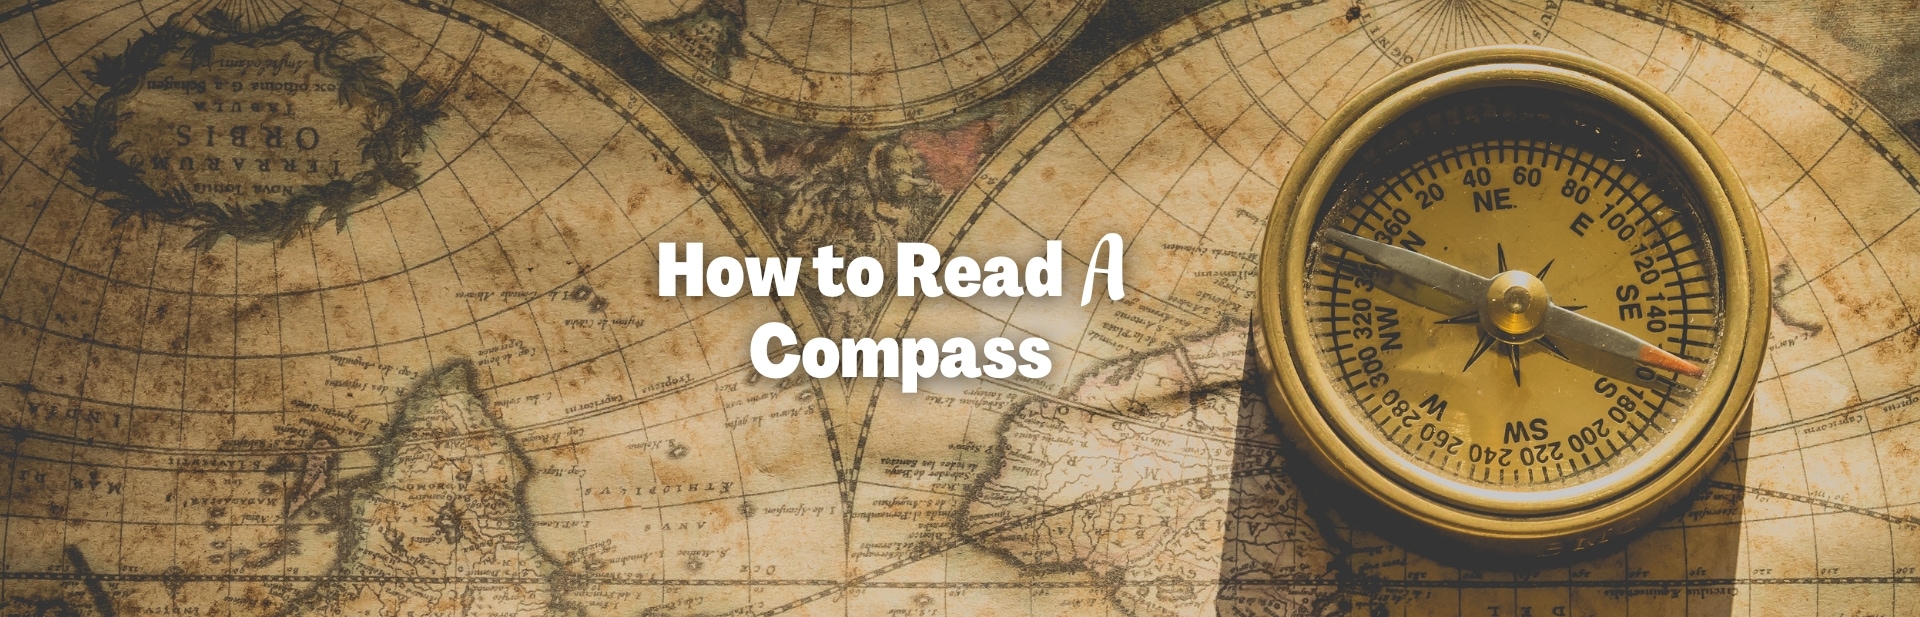 How to Read a Compass: A Complete Compass Navigation Guide